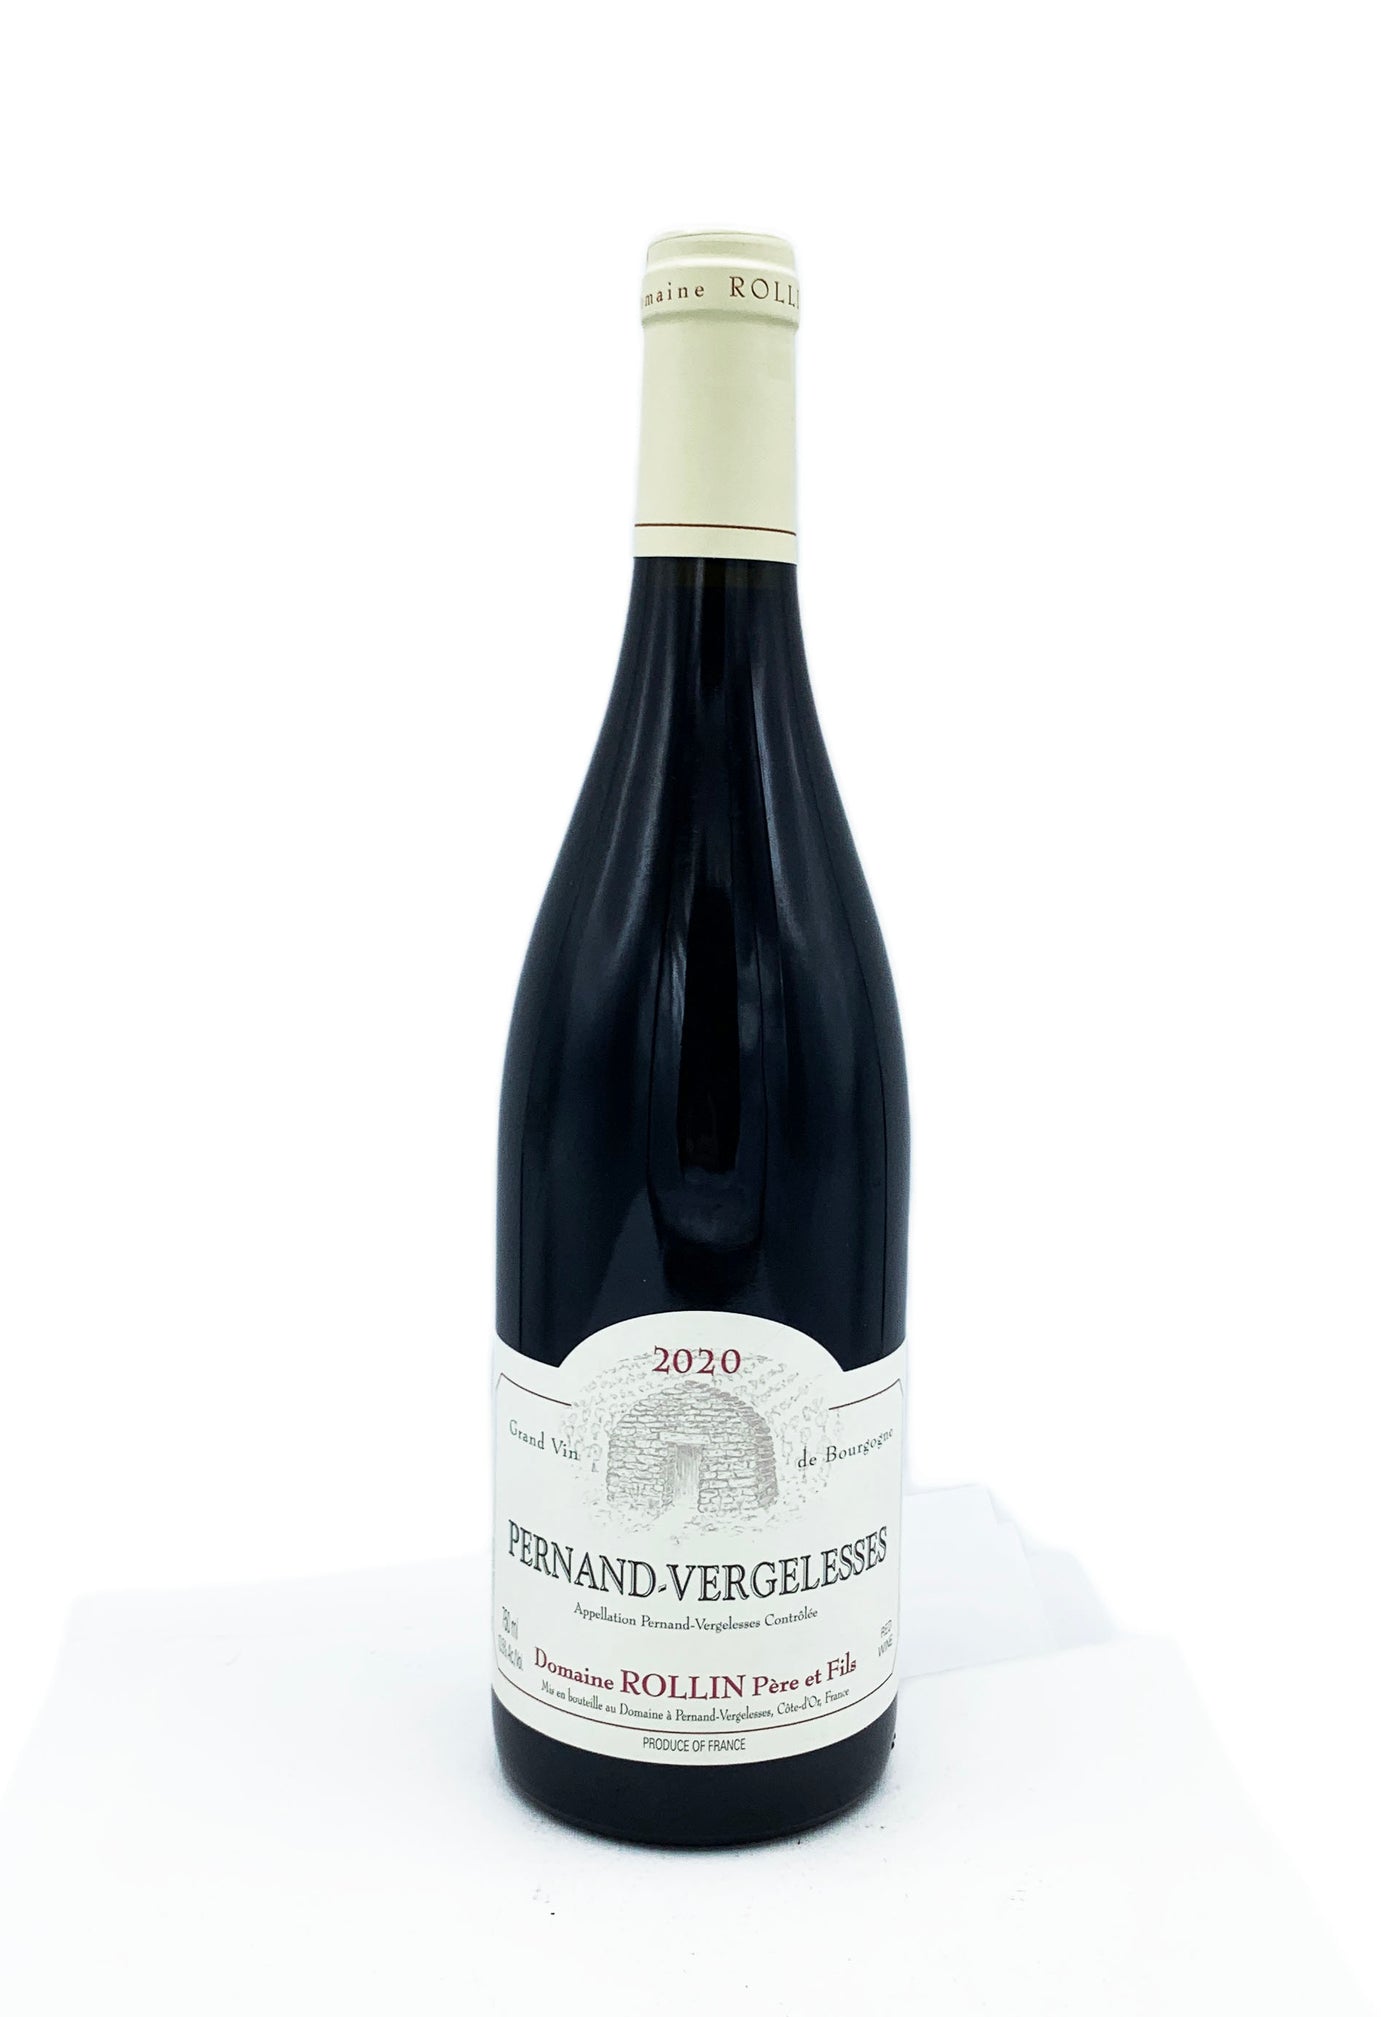 Domaine Rollin Pernand Vergelesses Rouge 2020